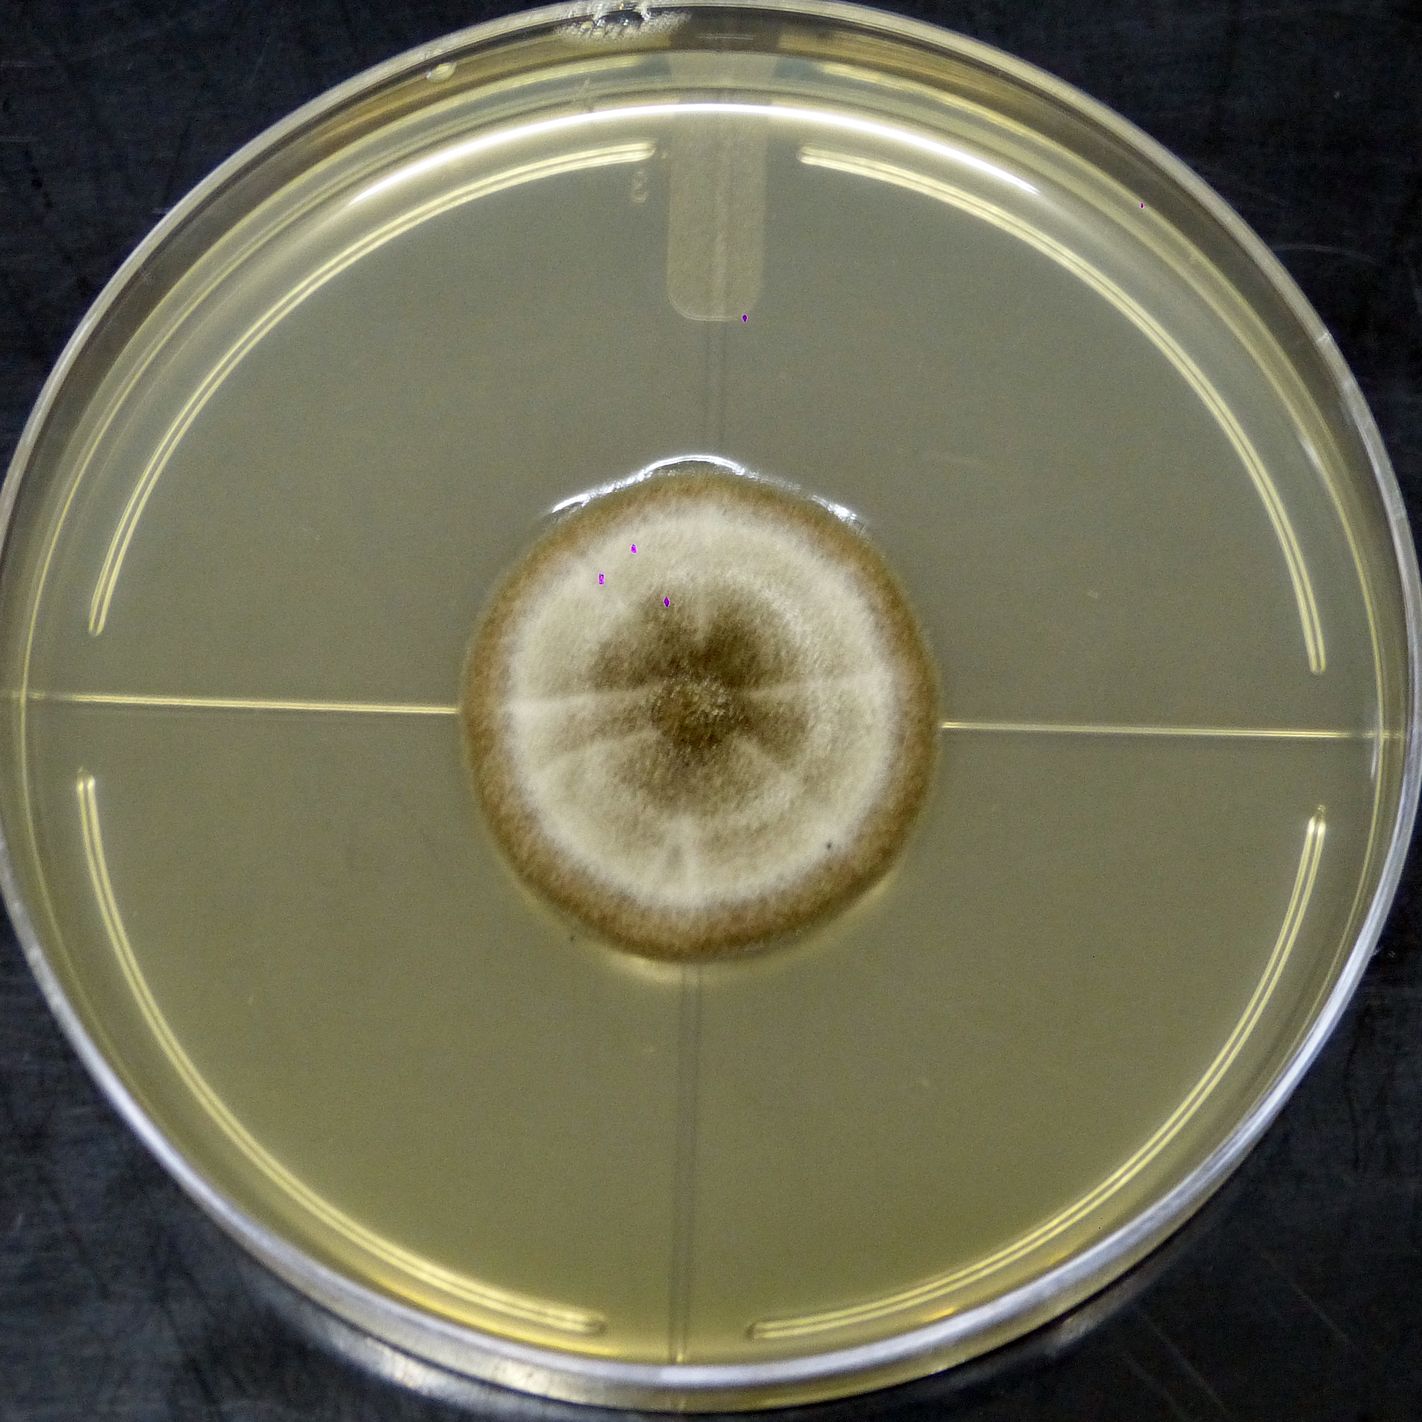 microbial-collection-13